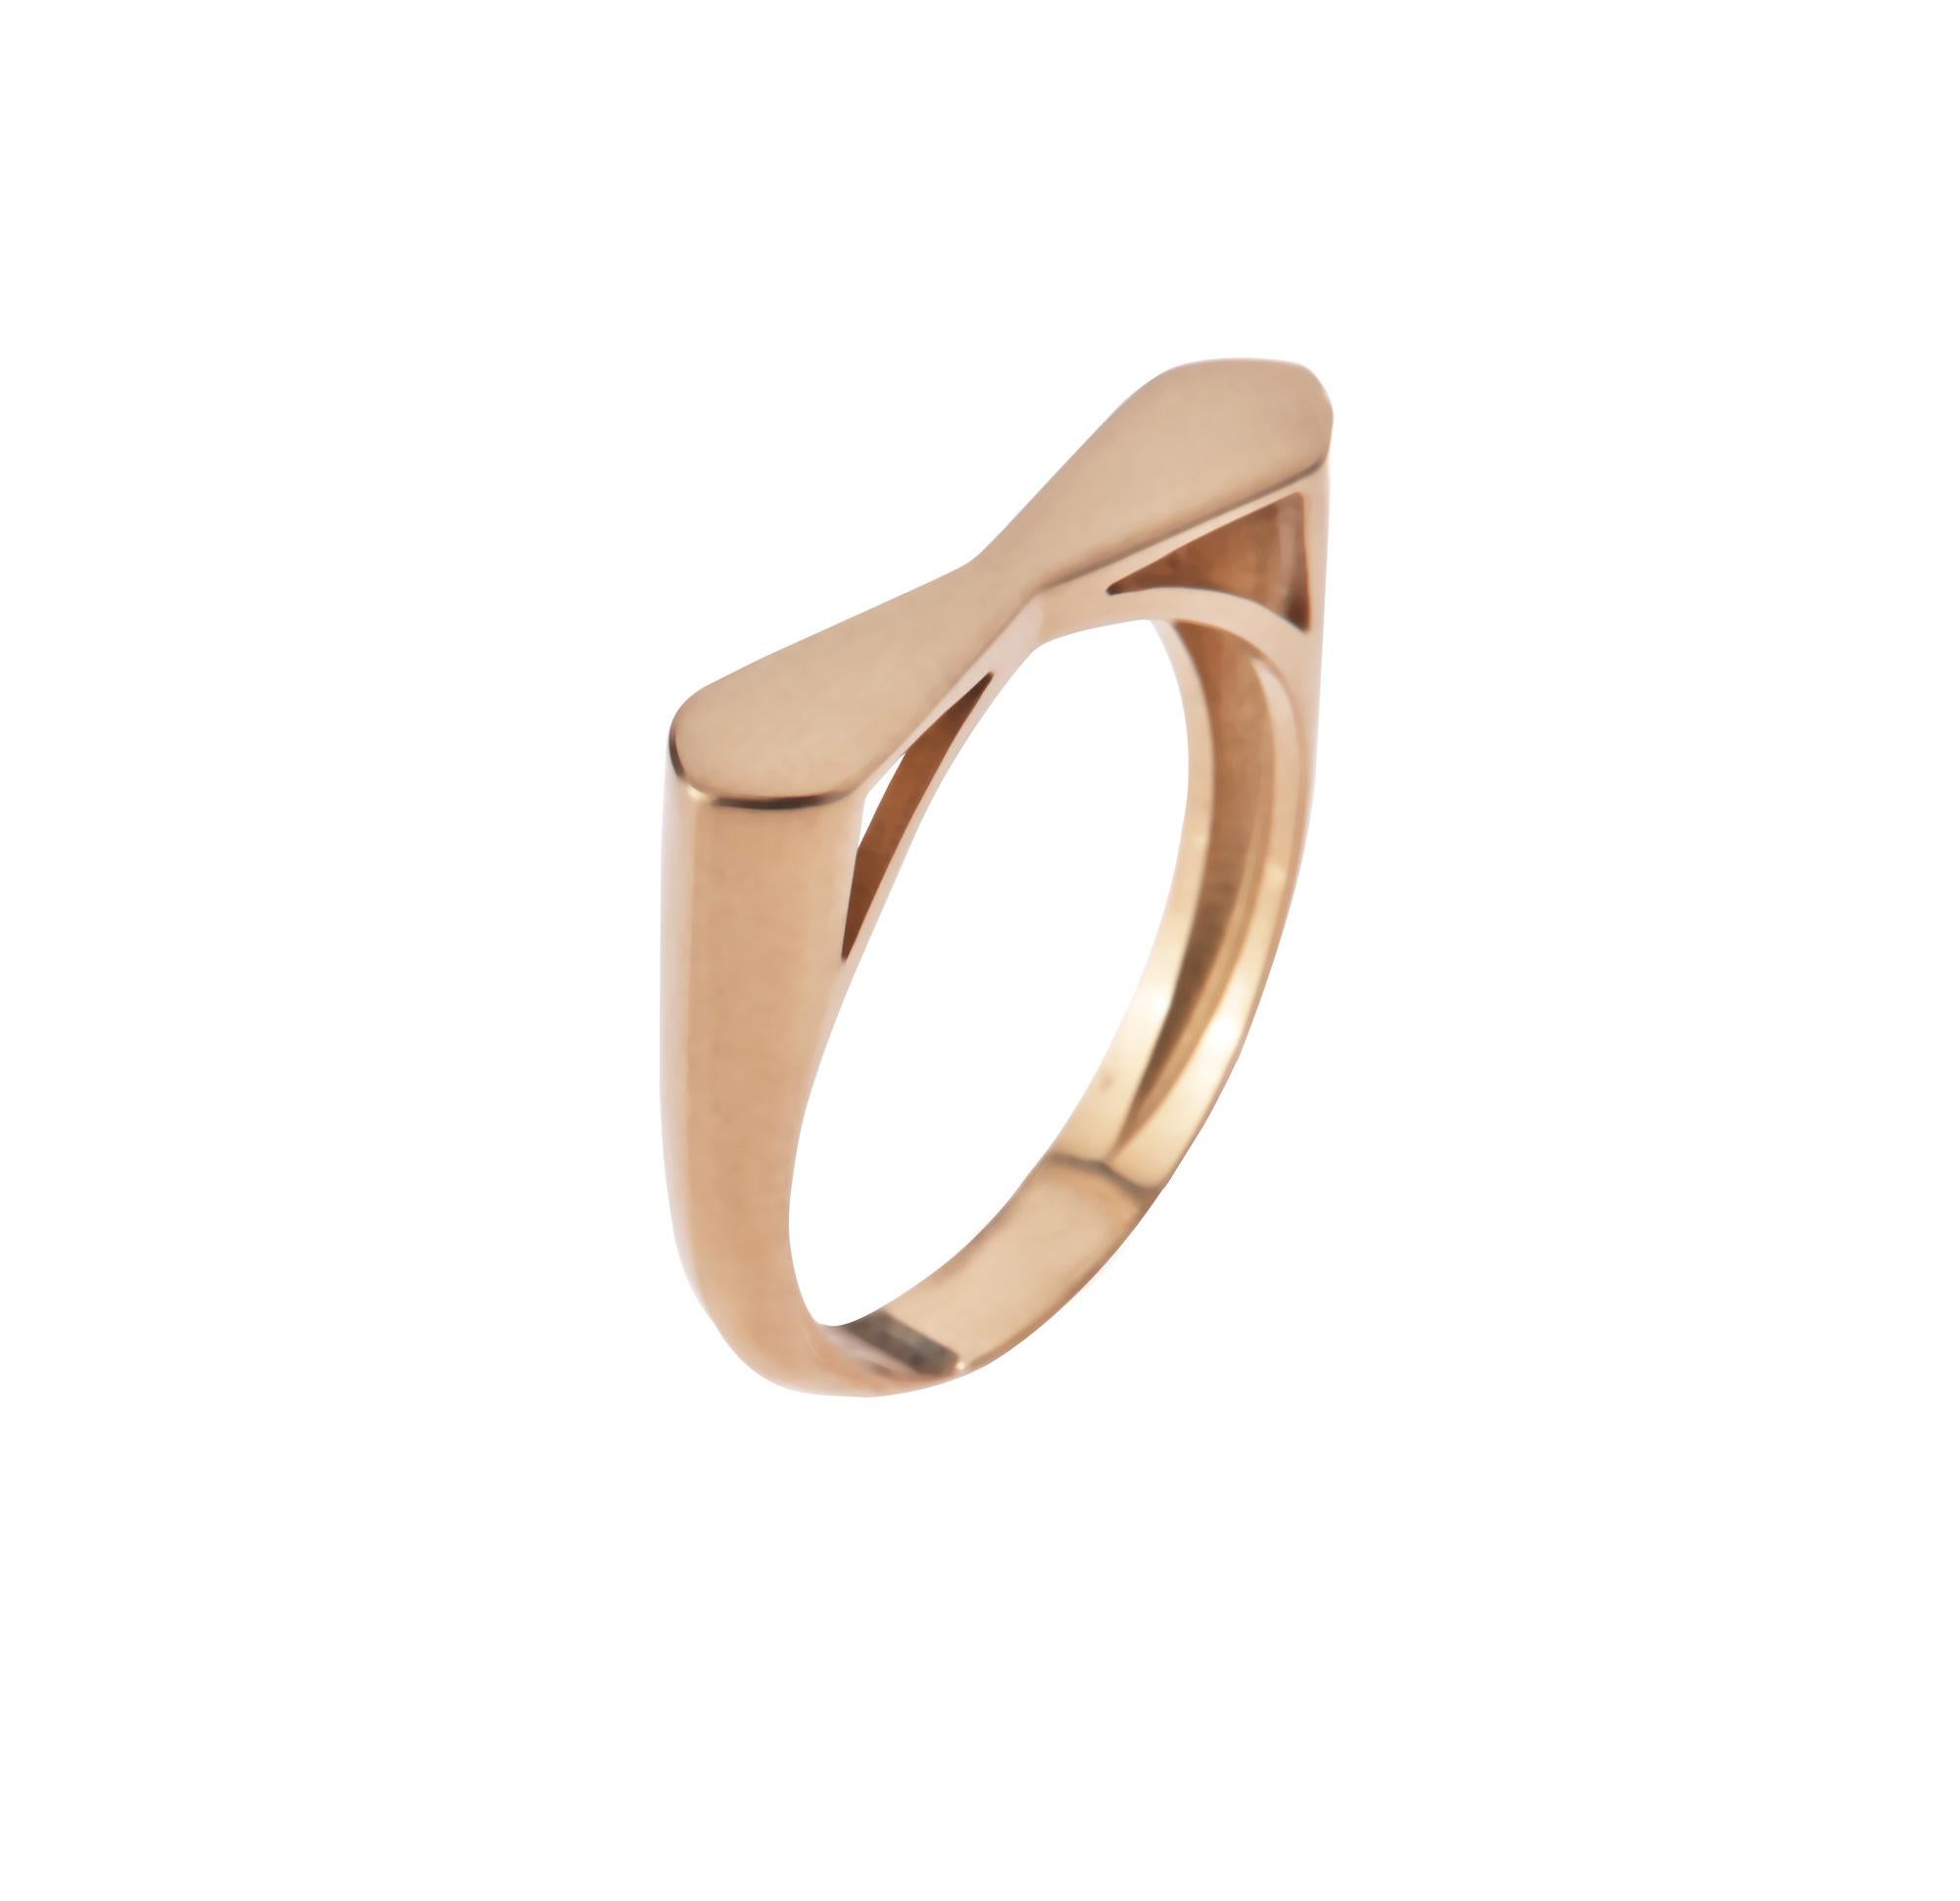 Comfy ring to combine with their Bracelet. Inspired by the figure of a tie. 
•	18 Karat Recycled Rose Gold 
•	Weight: approx. 4 gr gold
•	Hand-made in Spain
•	Bespoke: Yellow, White and Rose Gold
•	Bespoke take 3-4 weeks to handcraft and don´t